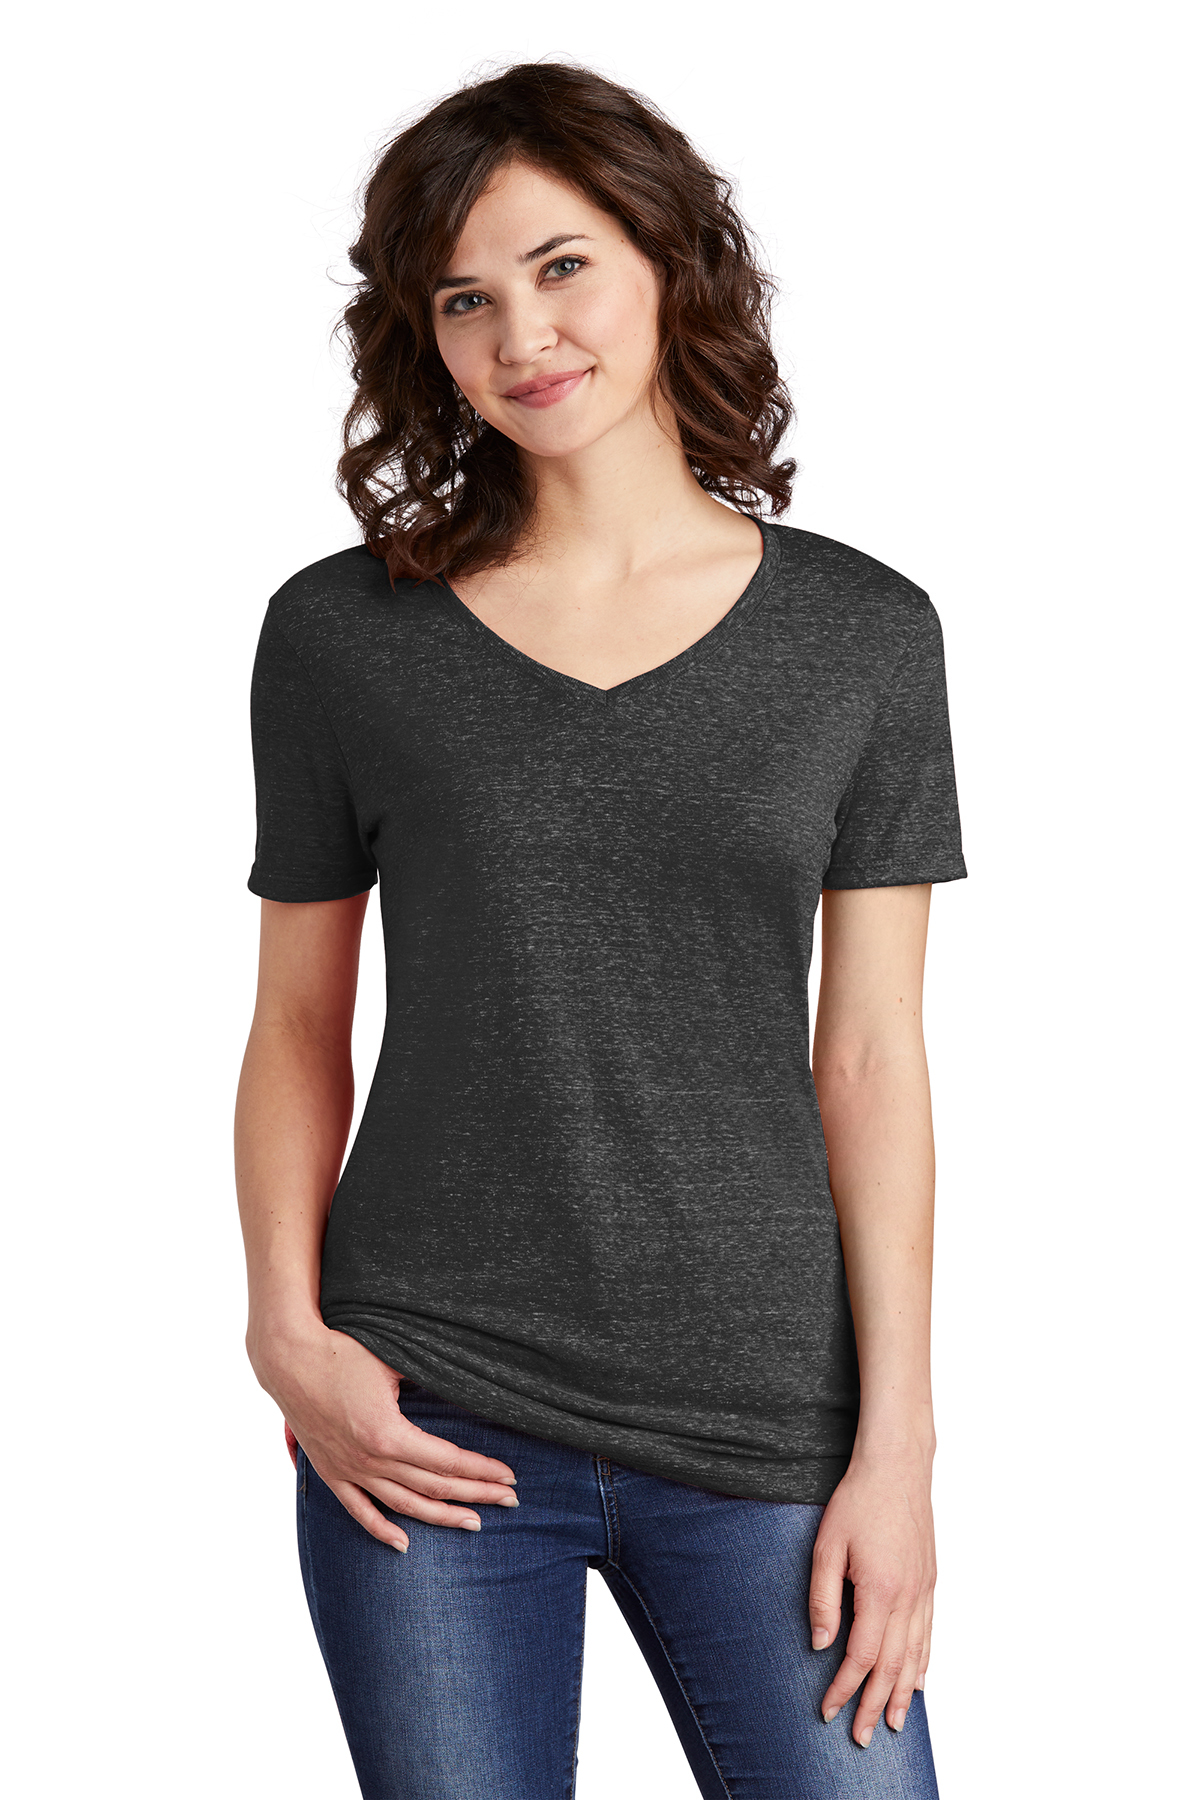 Jerzees Ladies Snow Heather Jersey V-Neck T-Shirt | Product | Company ...